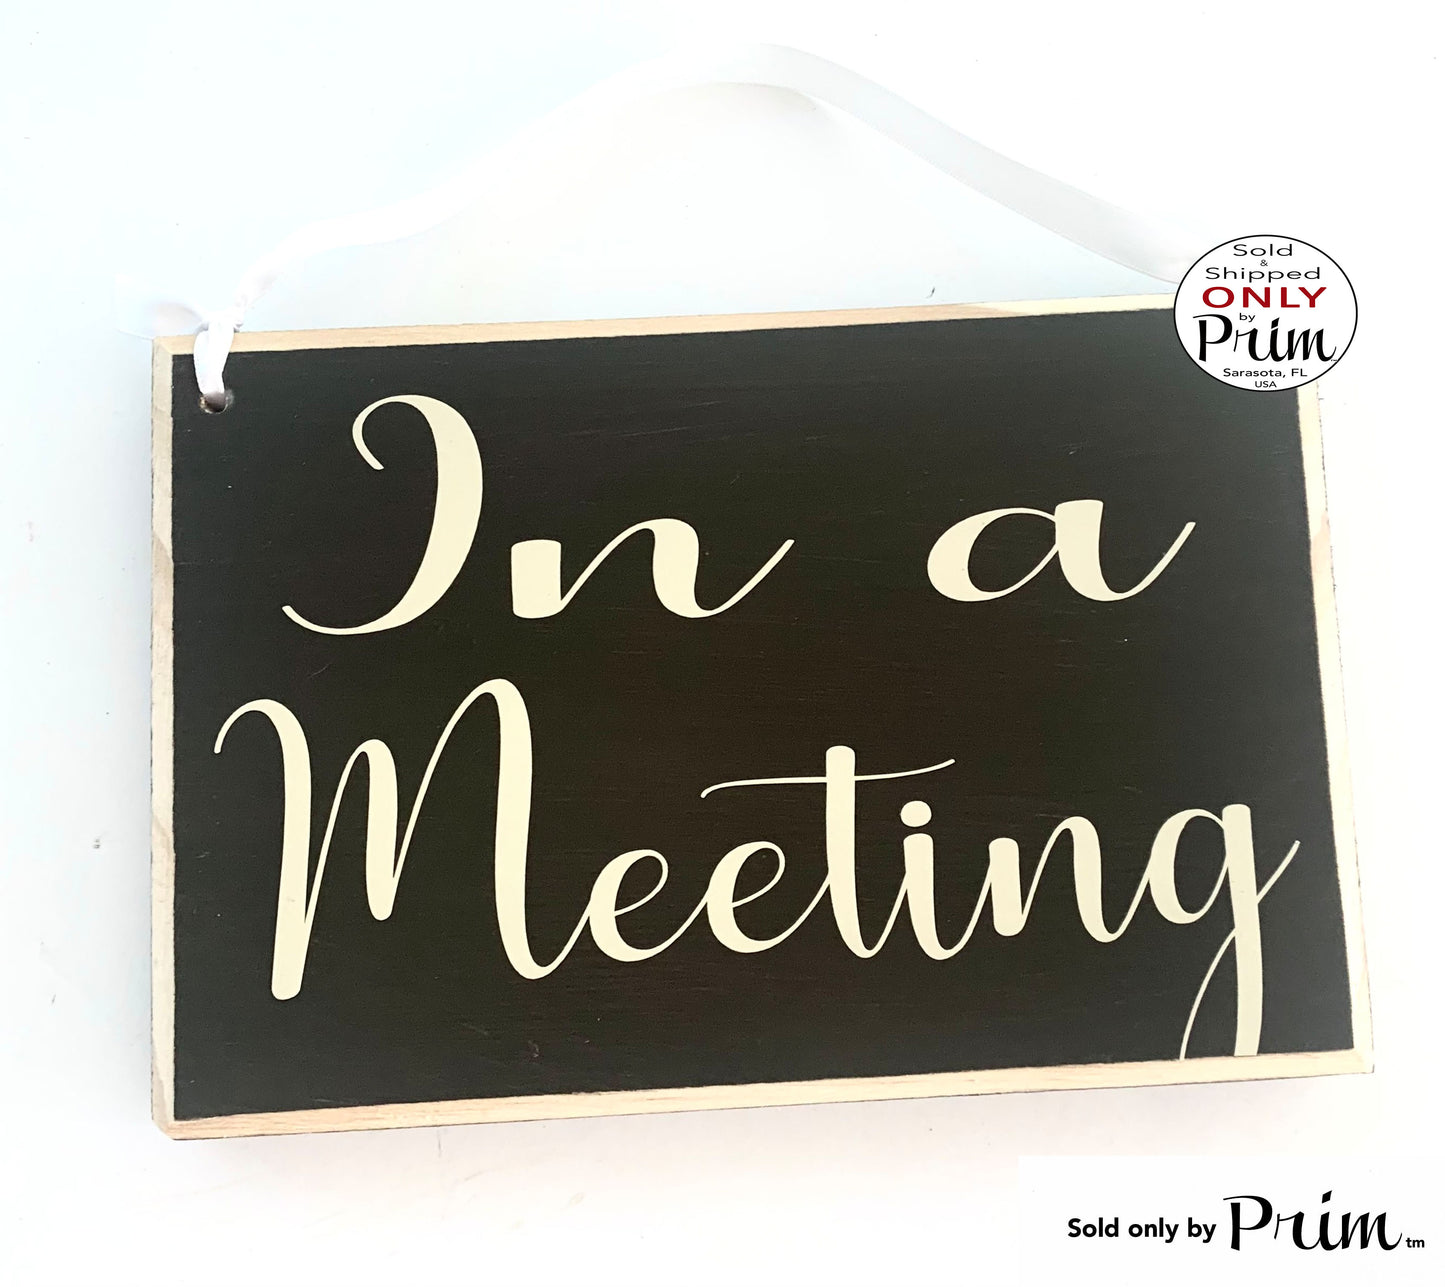 8x6 In a Meeting Custom Wood Sign Please Do Not Disturb Spa Salon Office Door Conference In Session Progress Wall Decor Hanger Door Plaque Designs by Prim